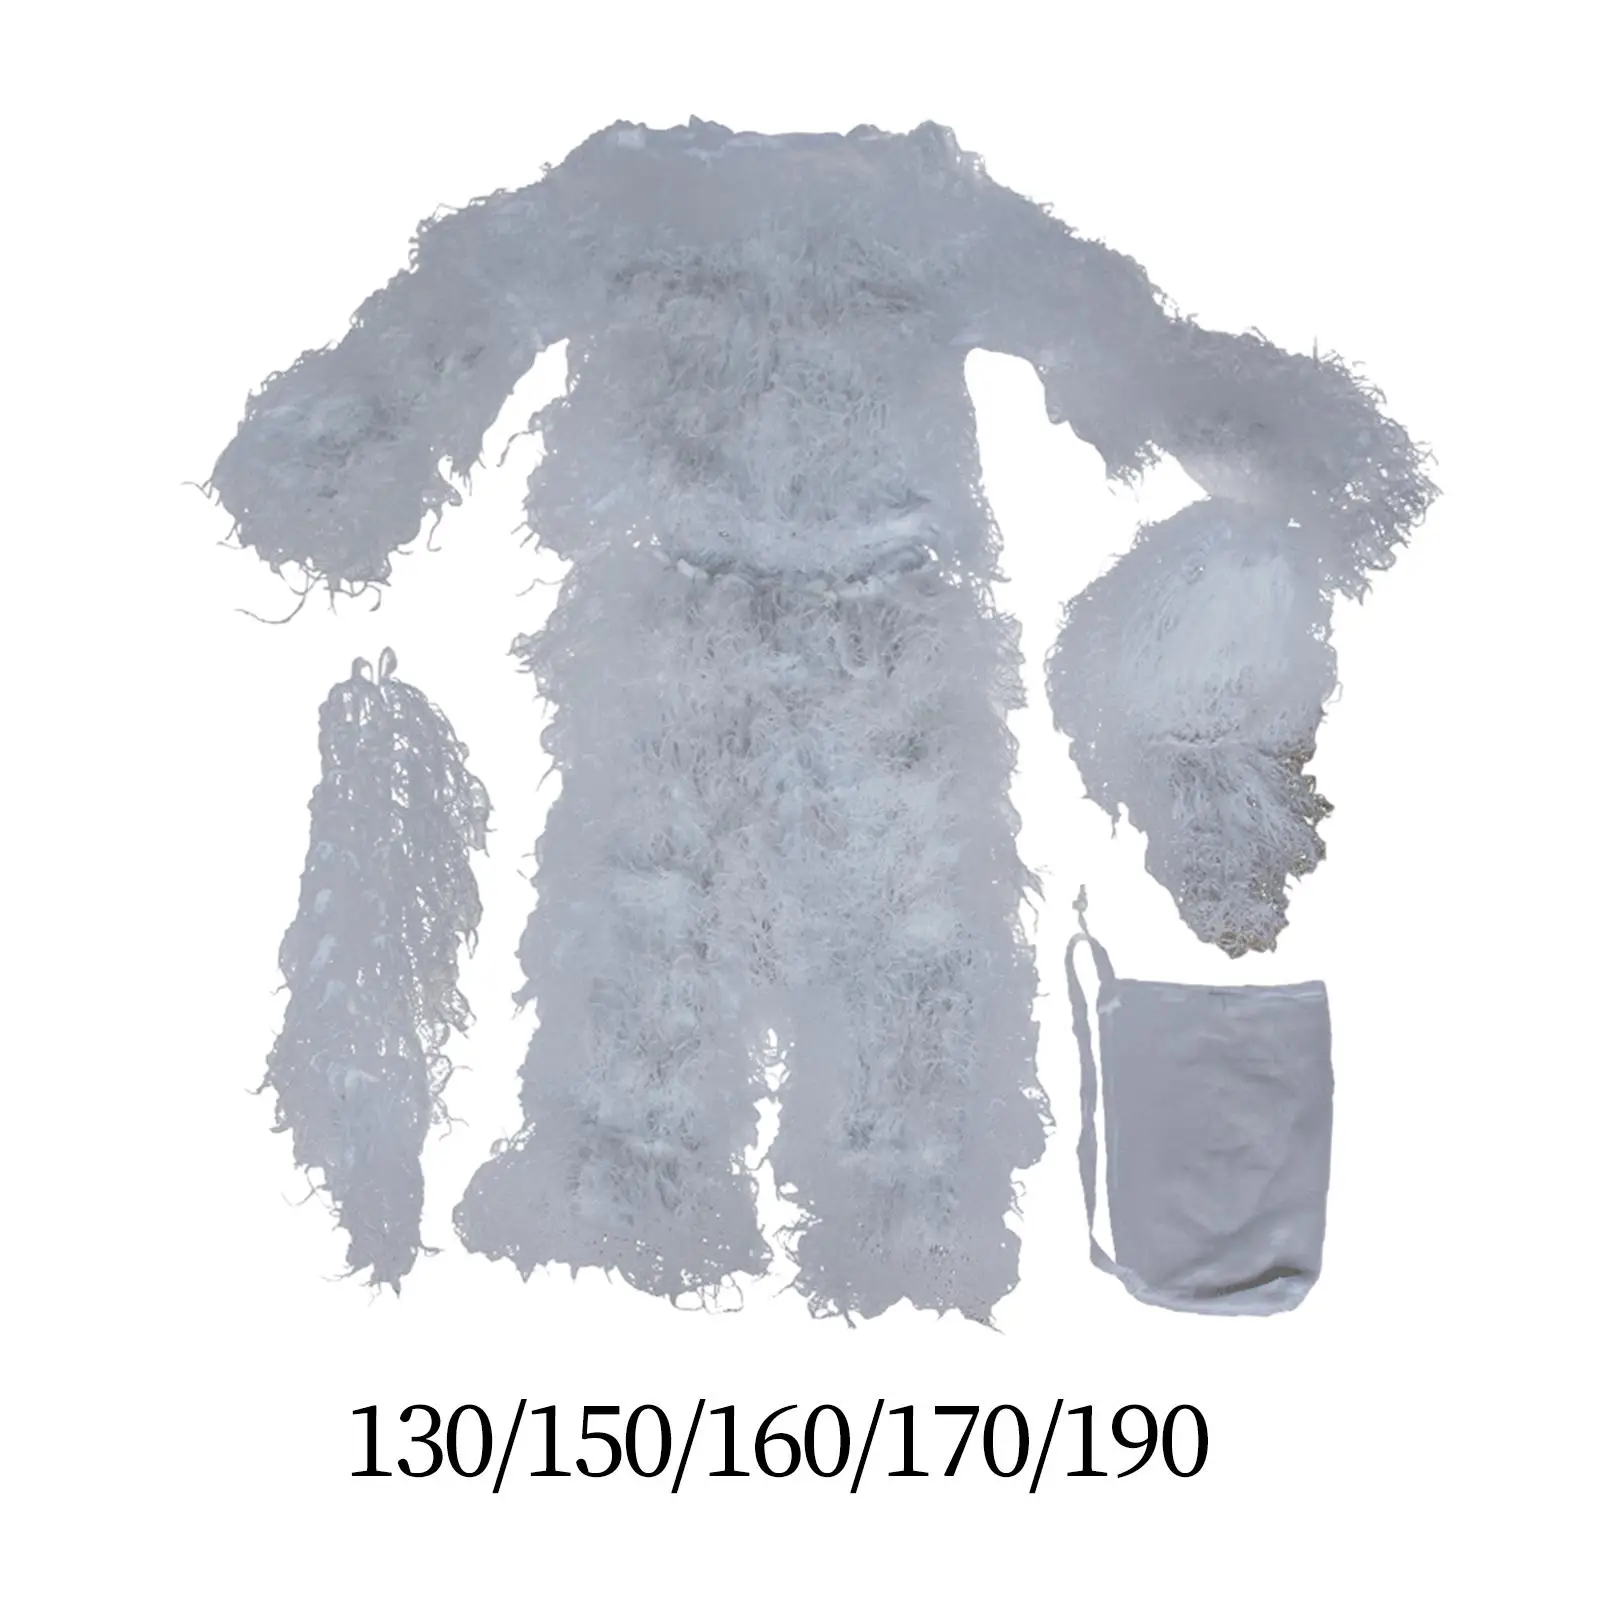 Ghillie Suit Snow Hunting Clothes for Kids Adults Clothing for Outdoor Game Hunting Photography Party Costume